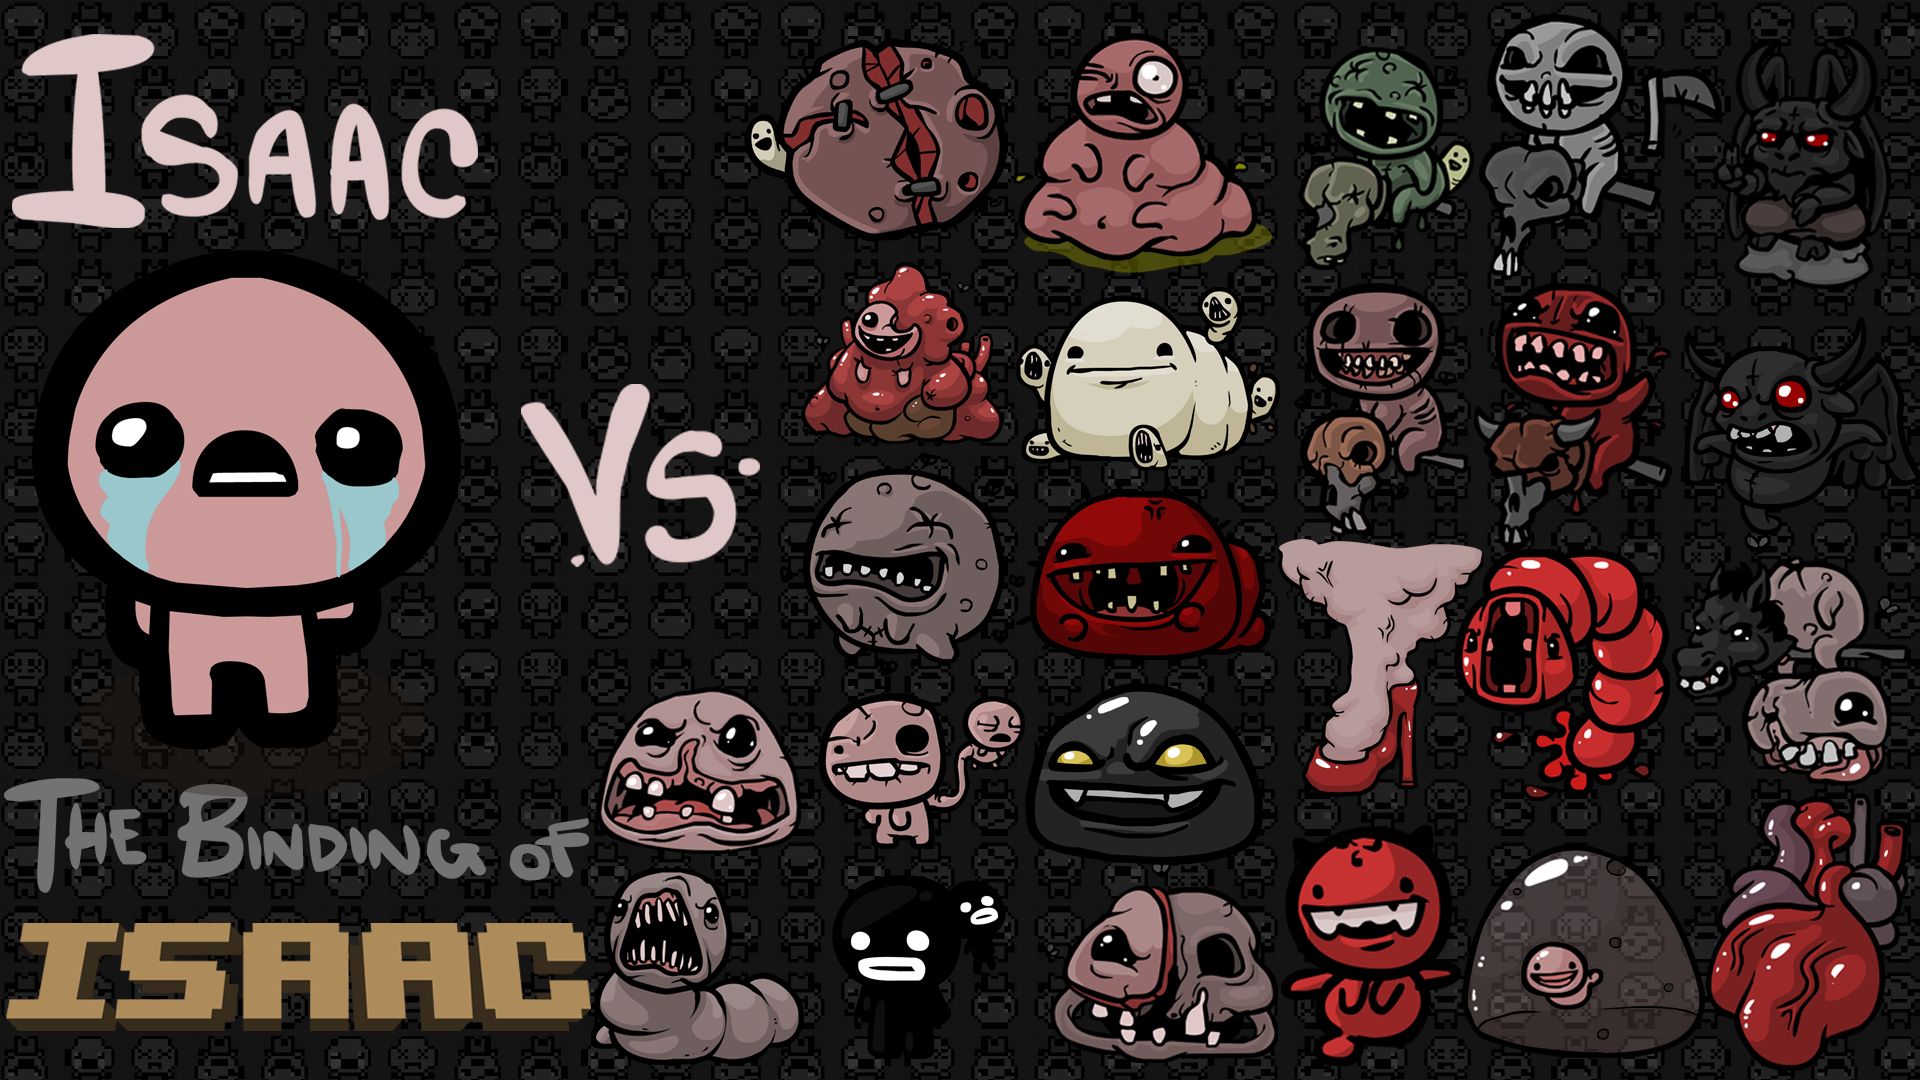 Download the binding of isaac s for ile phone free the binding of isaac hd pictures